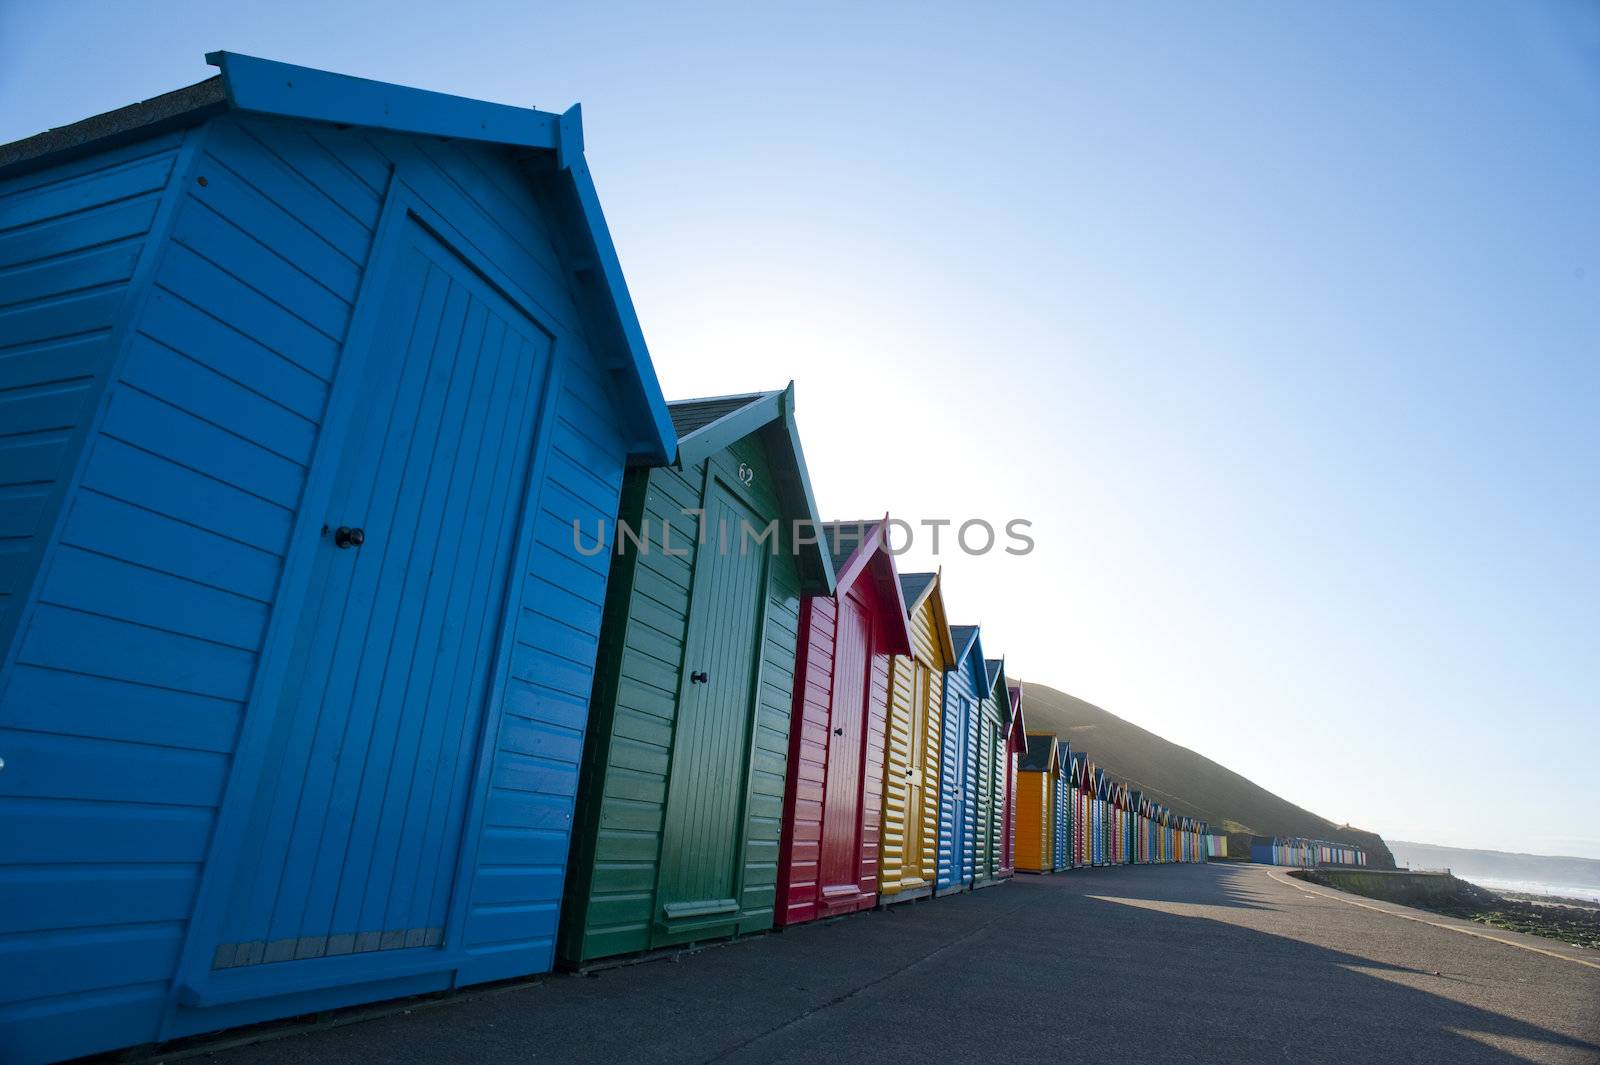 Row of colorful wooden beach huts in Whitby by stockarch